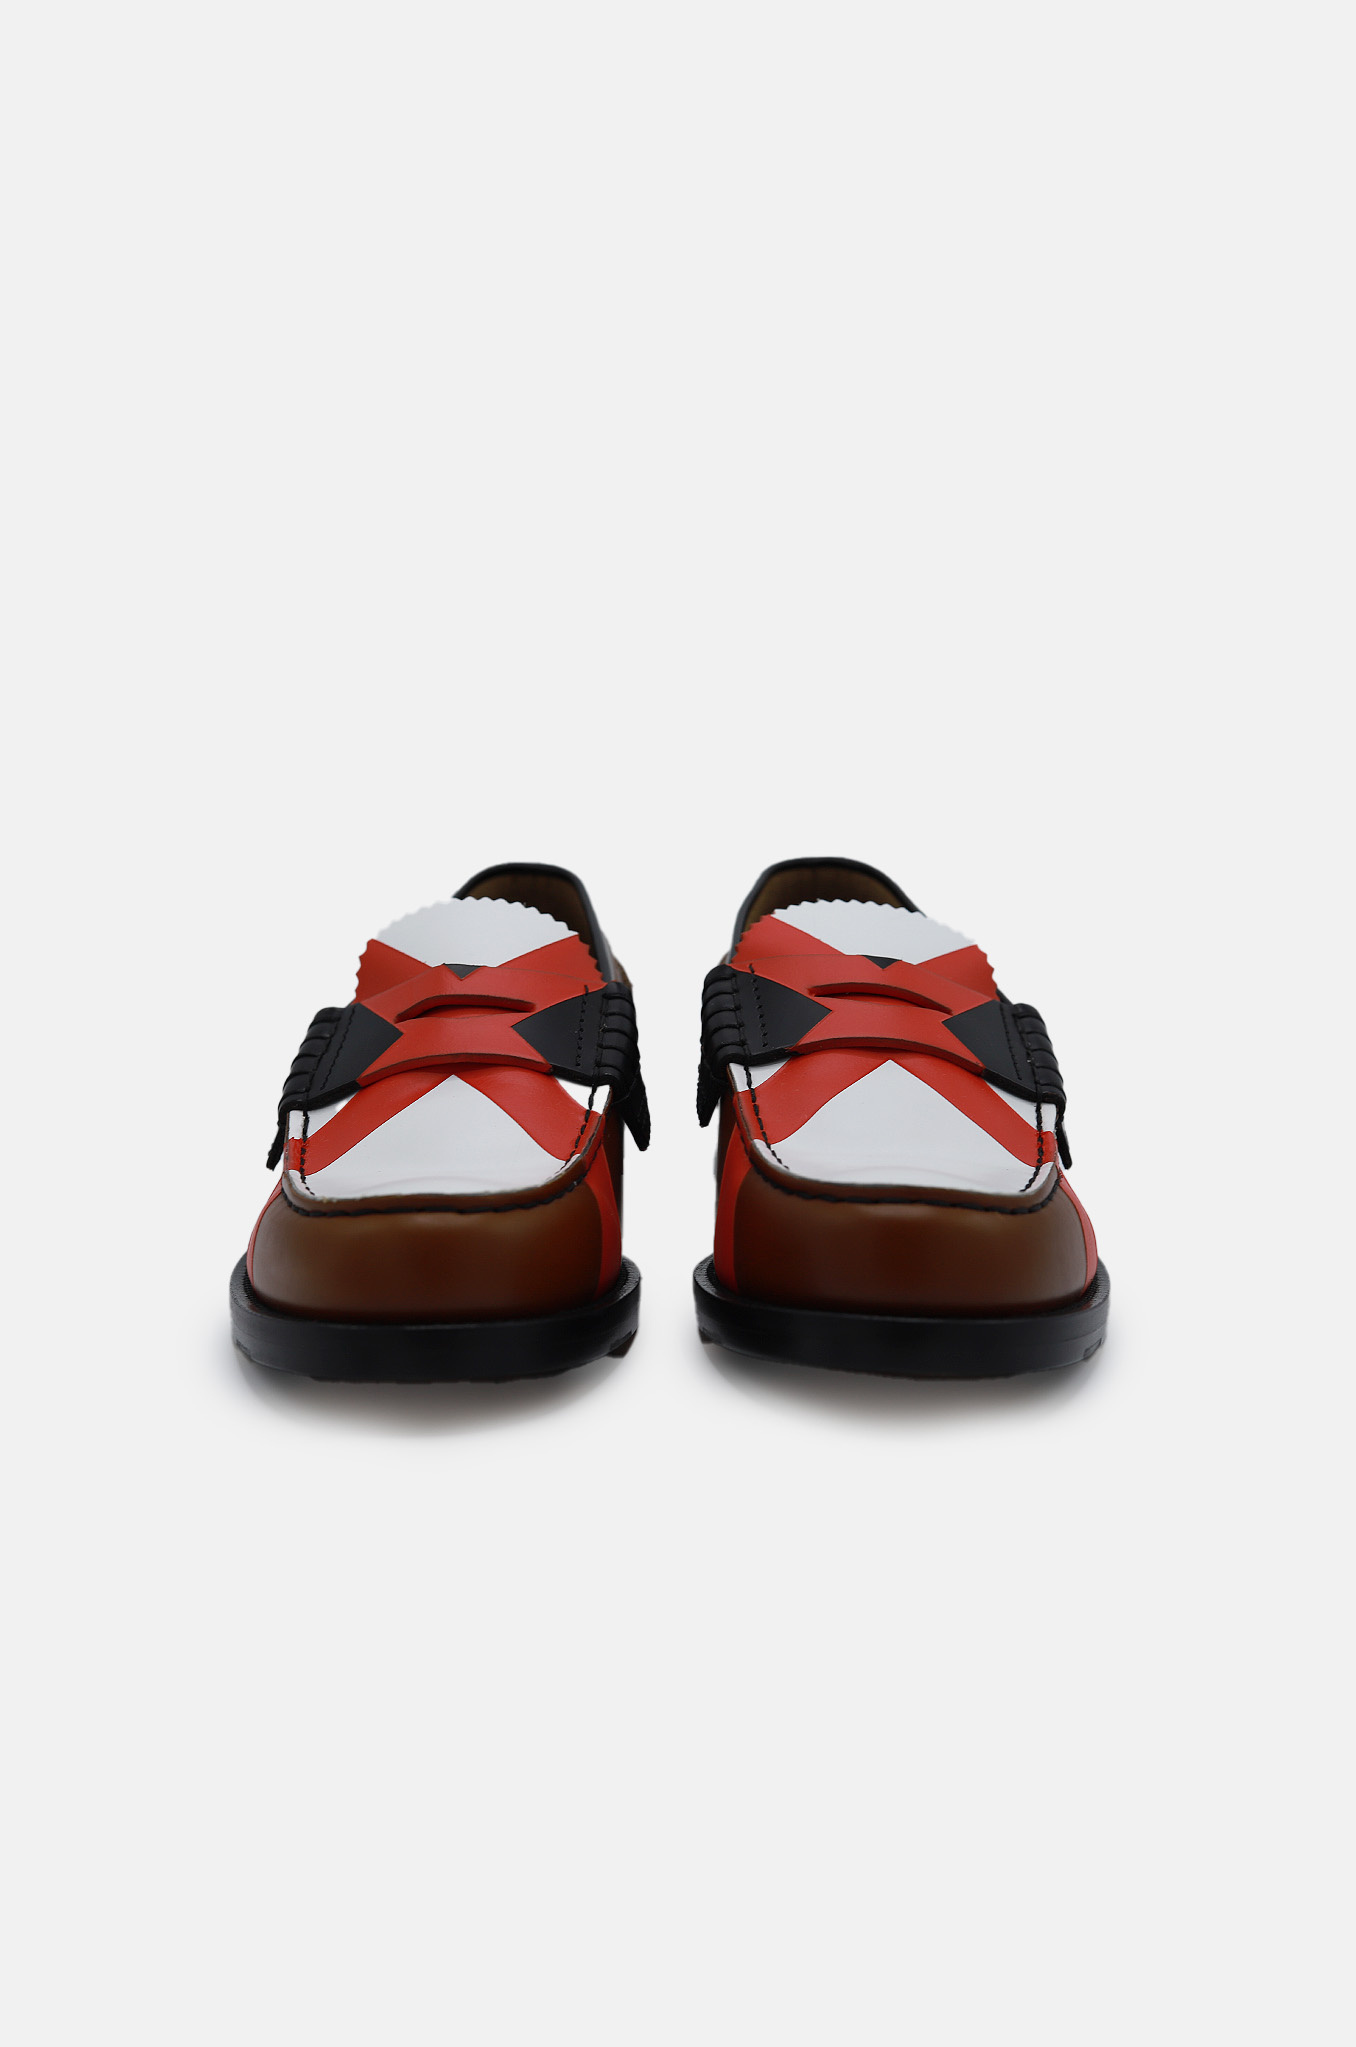 Loafers in Tan Black White X Red-6